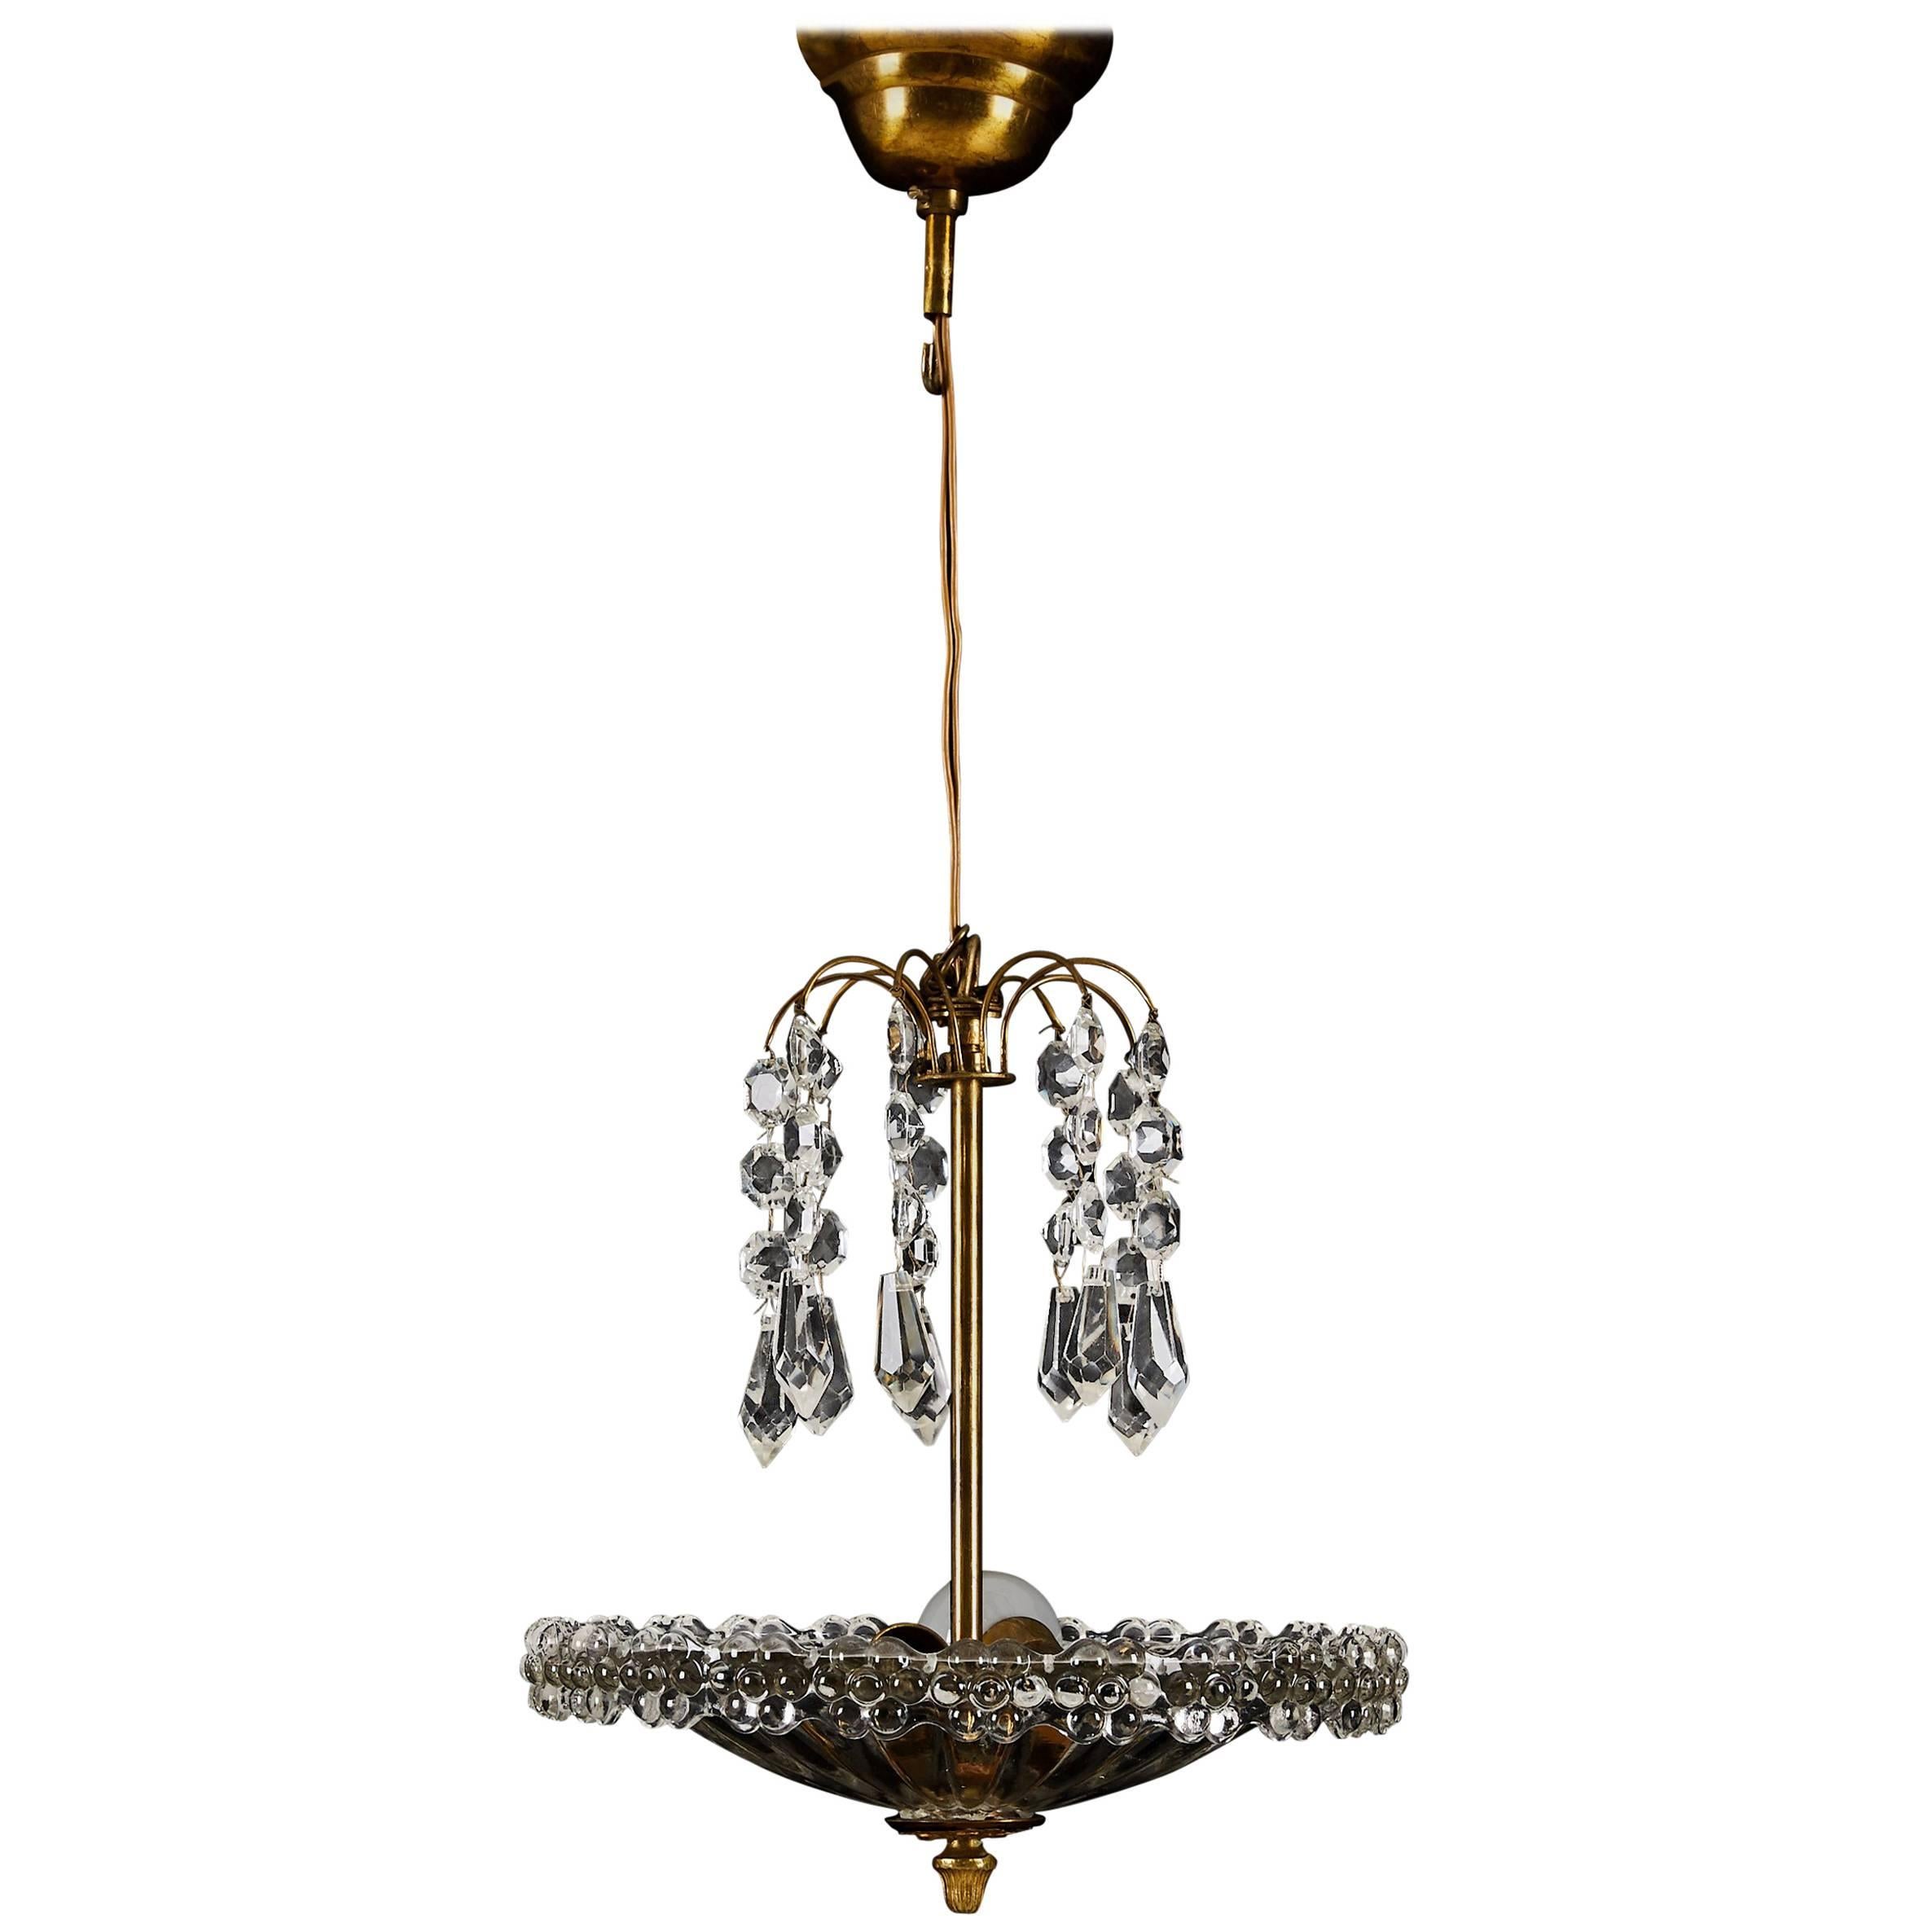 Midcentury Glass Chandelier For Sale